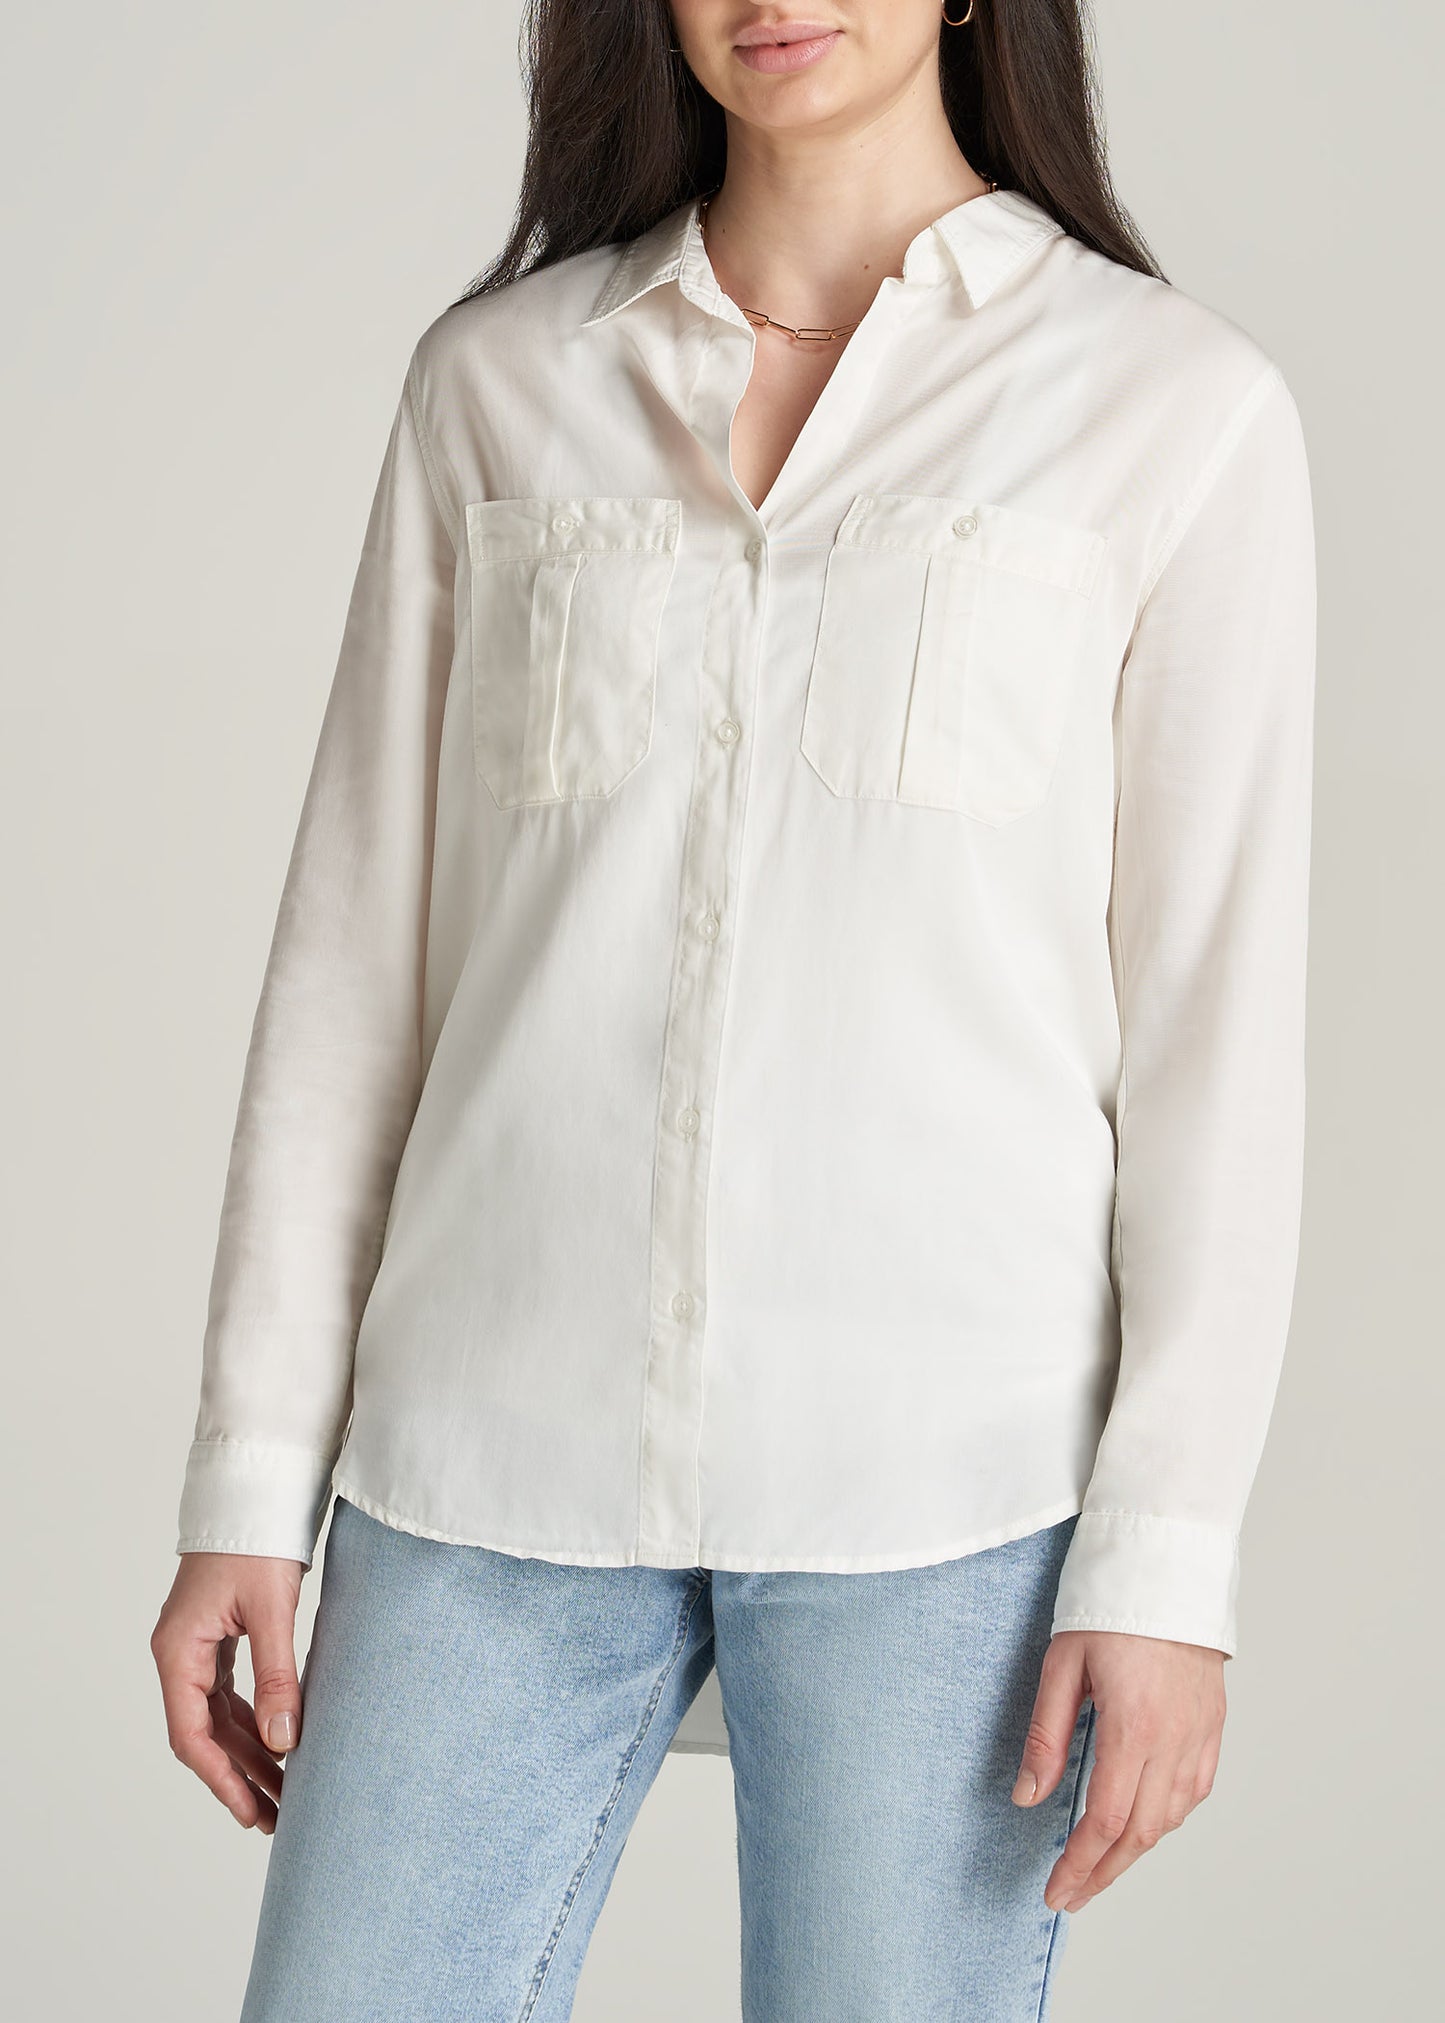       American-Tall-Women-Classic-Fit-Tencel-Shirt-Ivory-front